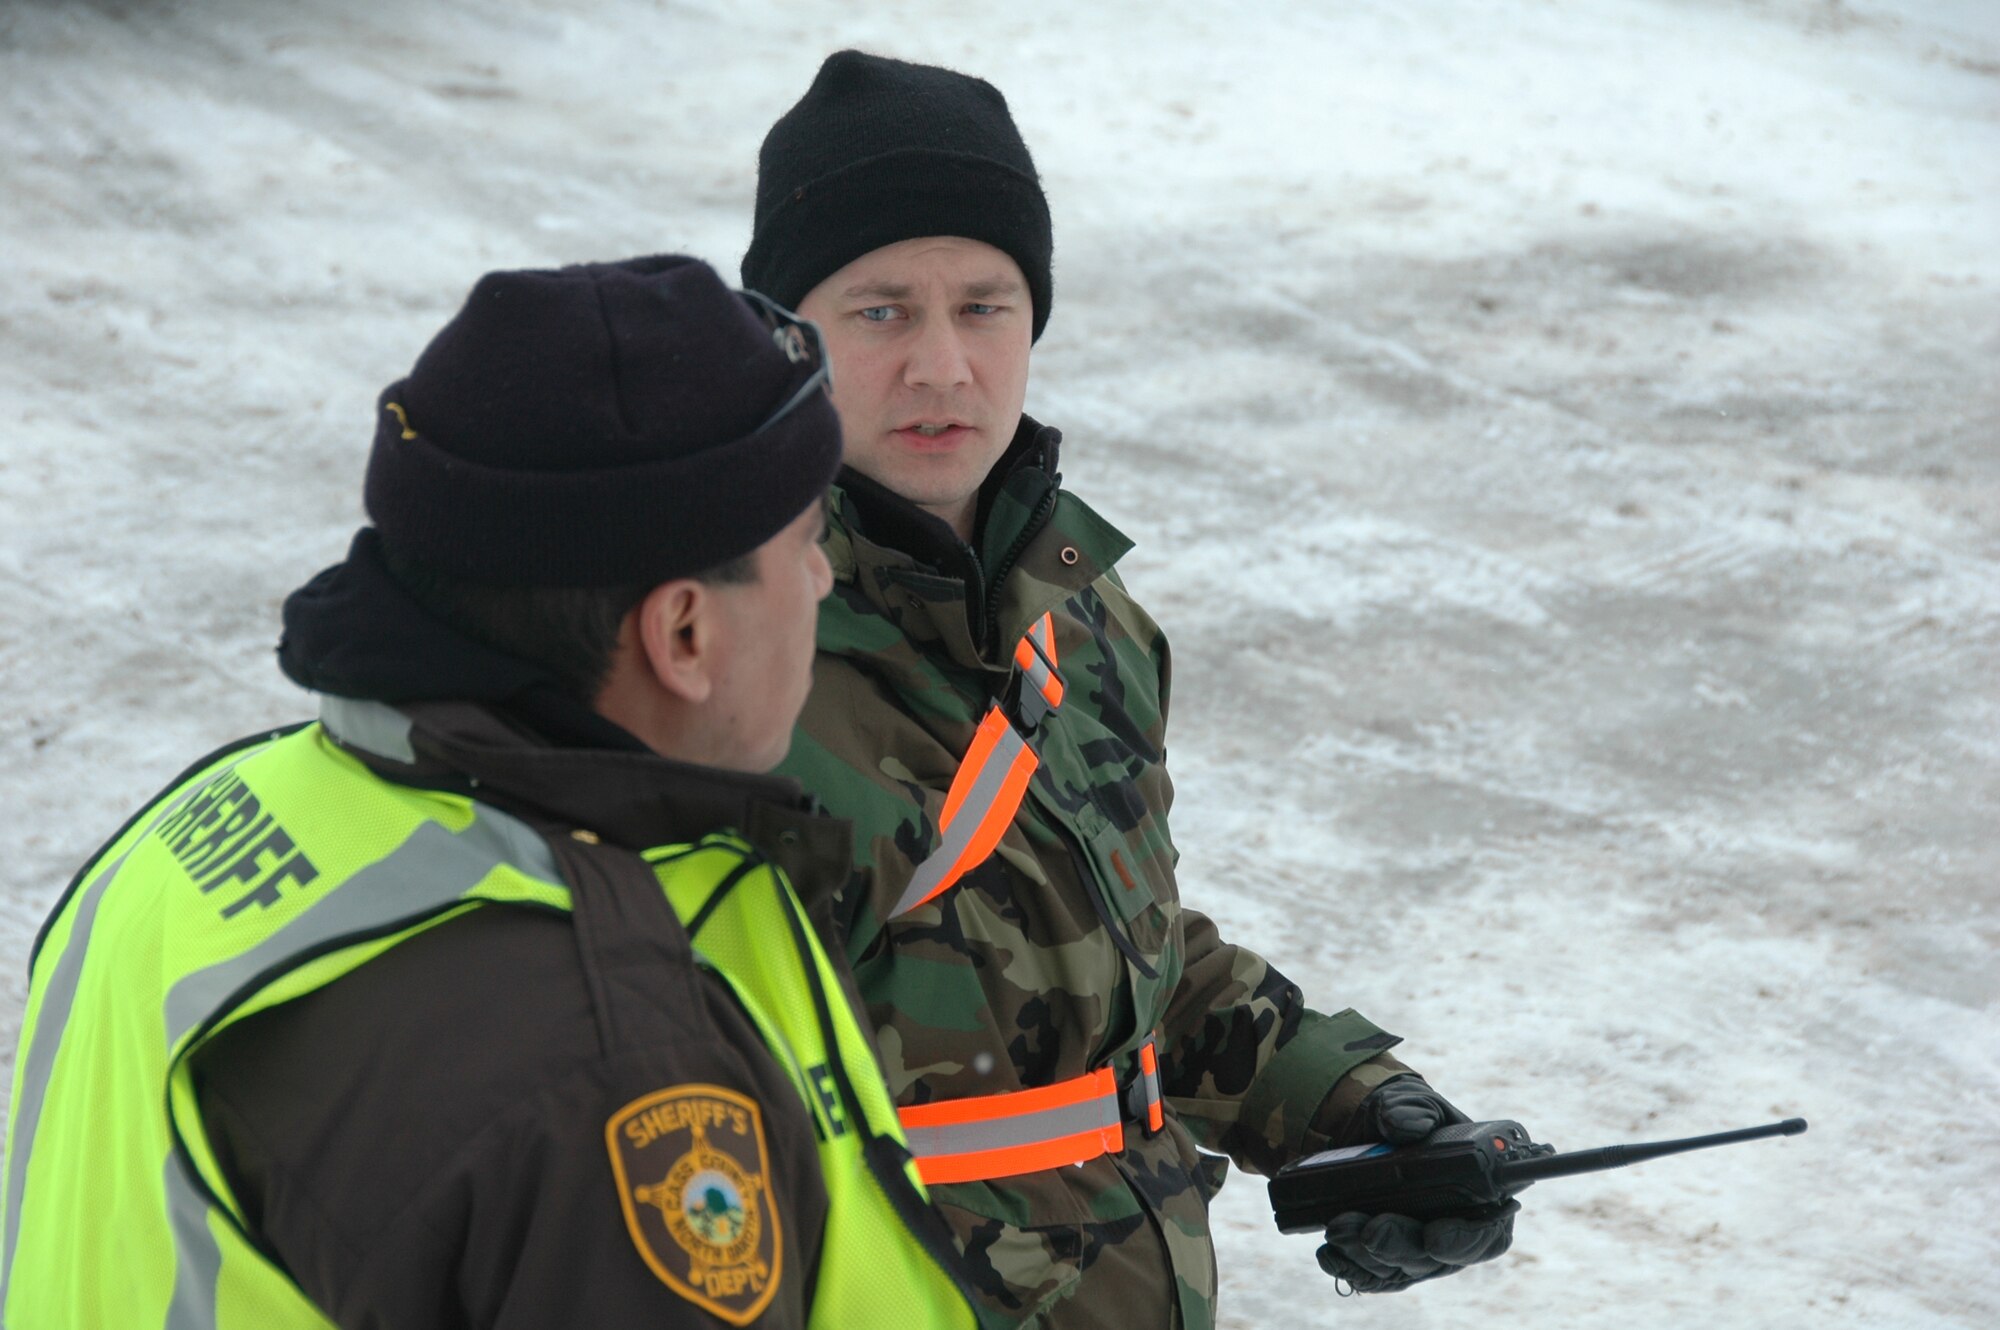 2nd Lt. Jeffery Hovdeness, of the 119th Wing, leads a quick response force team as he discusses plans for civilian welfare visits in rural areas north of Fargo with a Cass County Sherrif's deputy April 1.